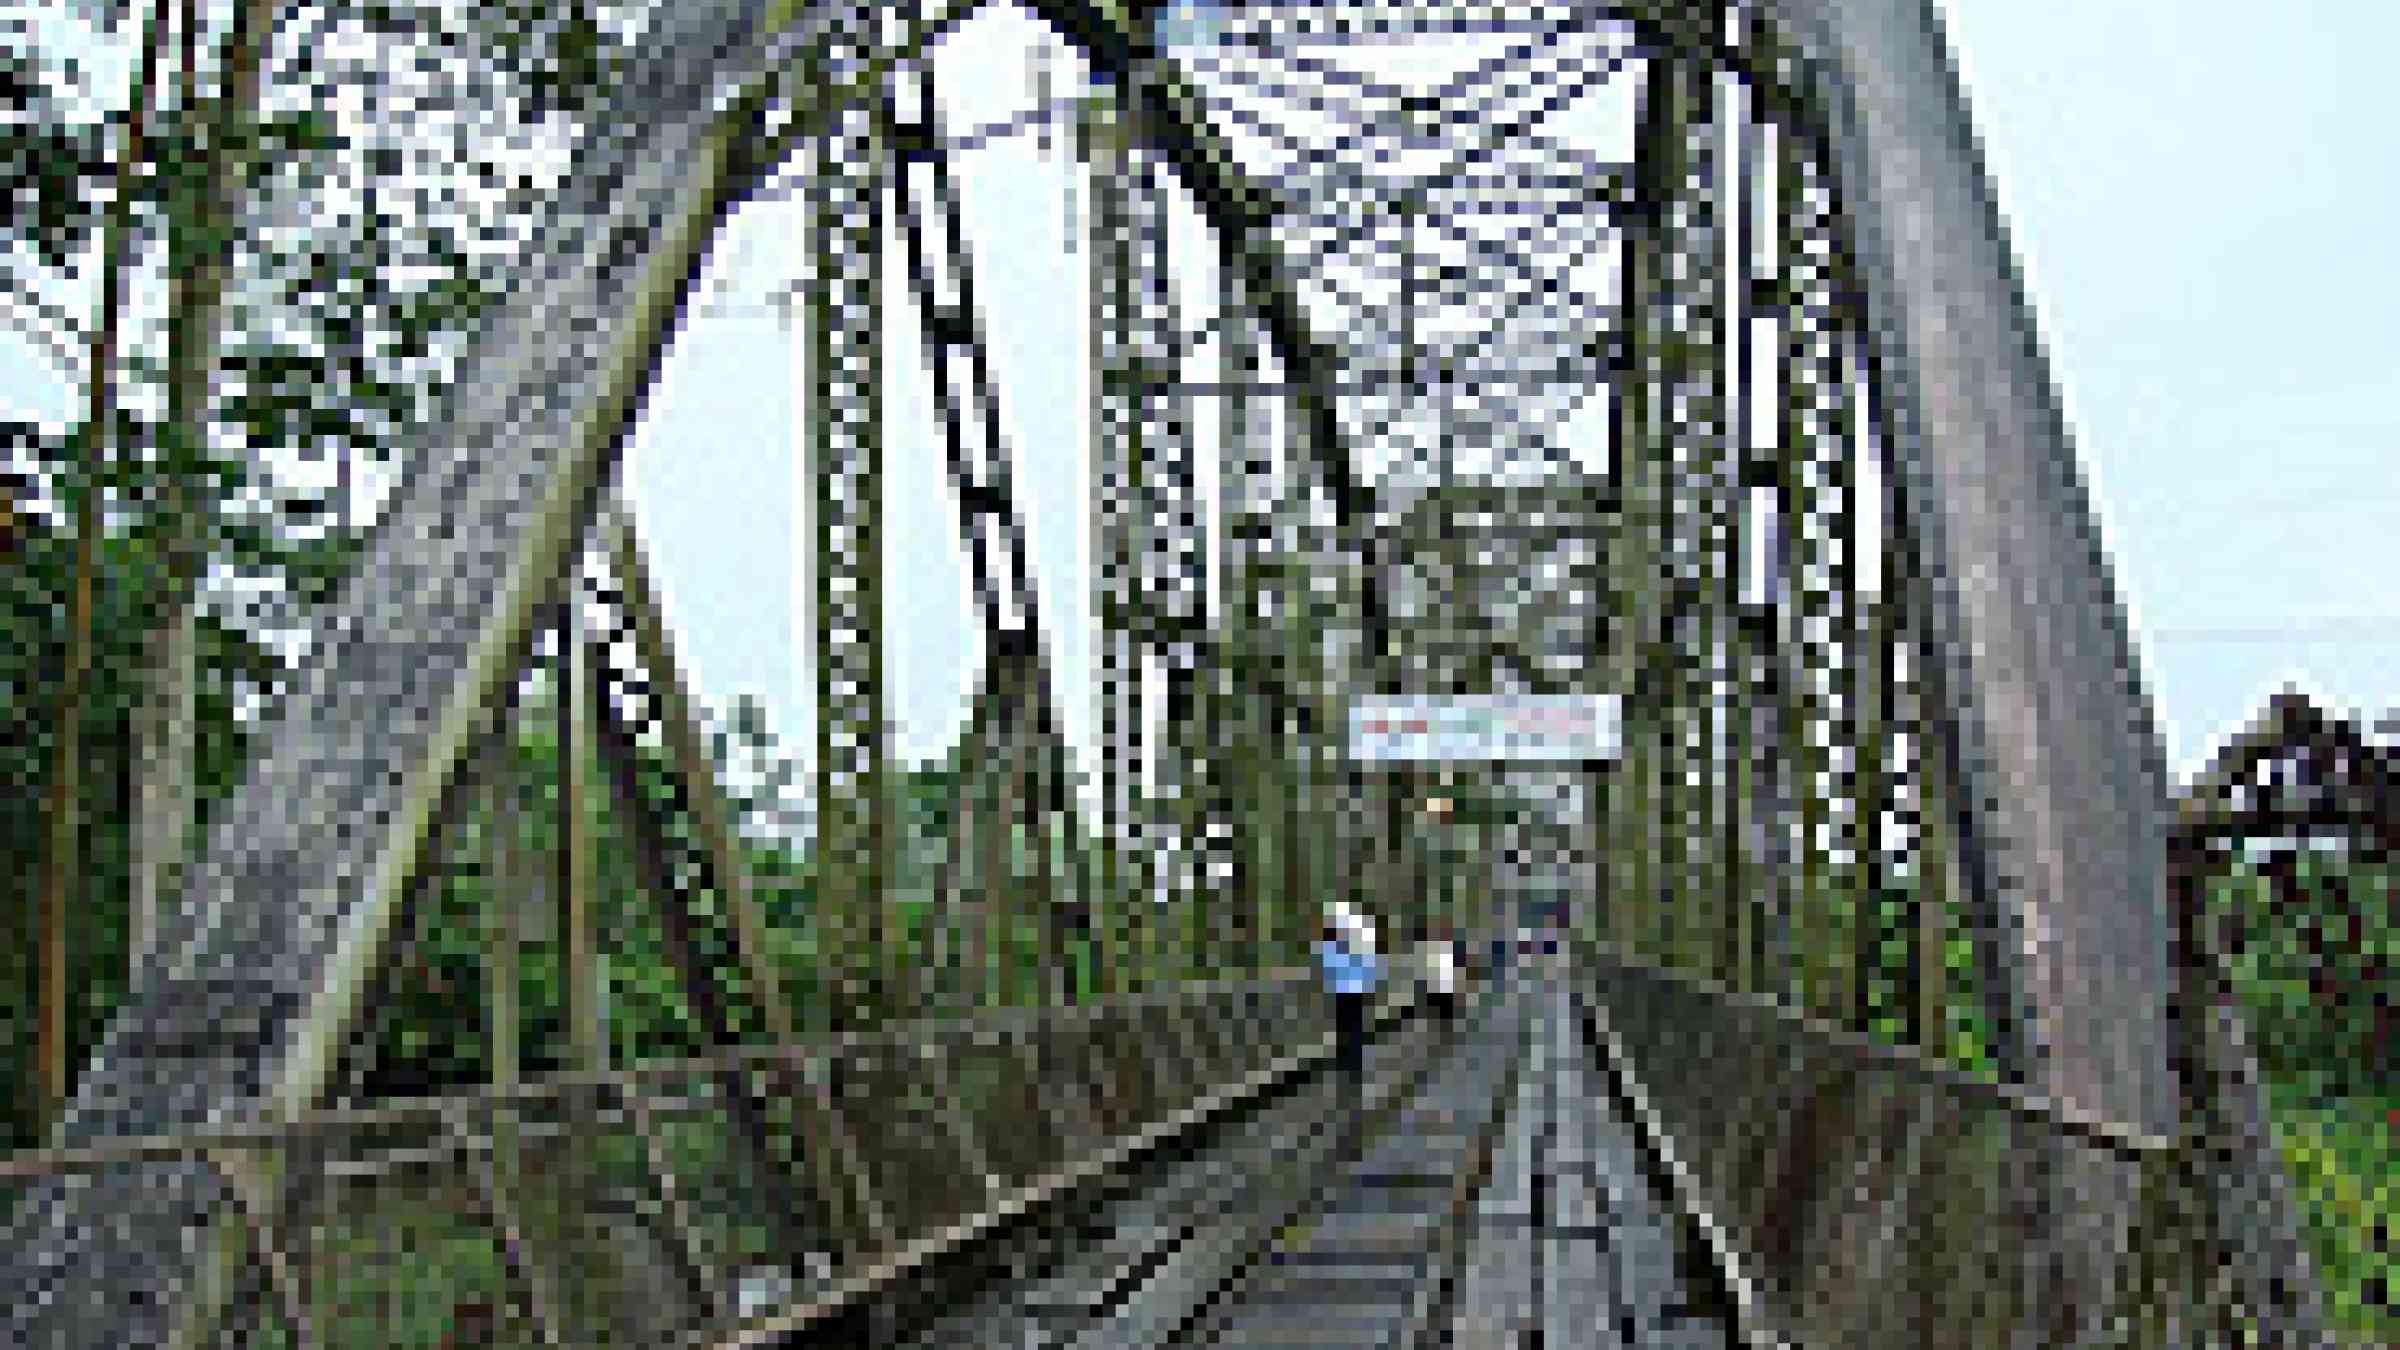 Sixaola Bridge, gateway to Panama via Costa Rica on the Carribean coast, by Flickr user Wha'ppen / Arturo Sotillo, Creative Commons Attribution-ShareAlike 2.0 Generic, http://www.flickr.com/photos/whappen/2083481144/